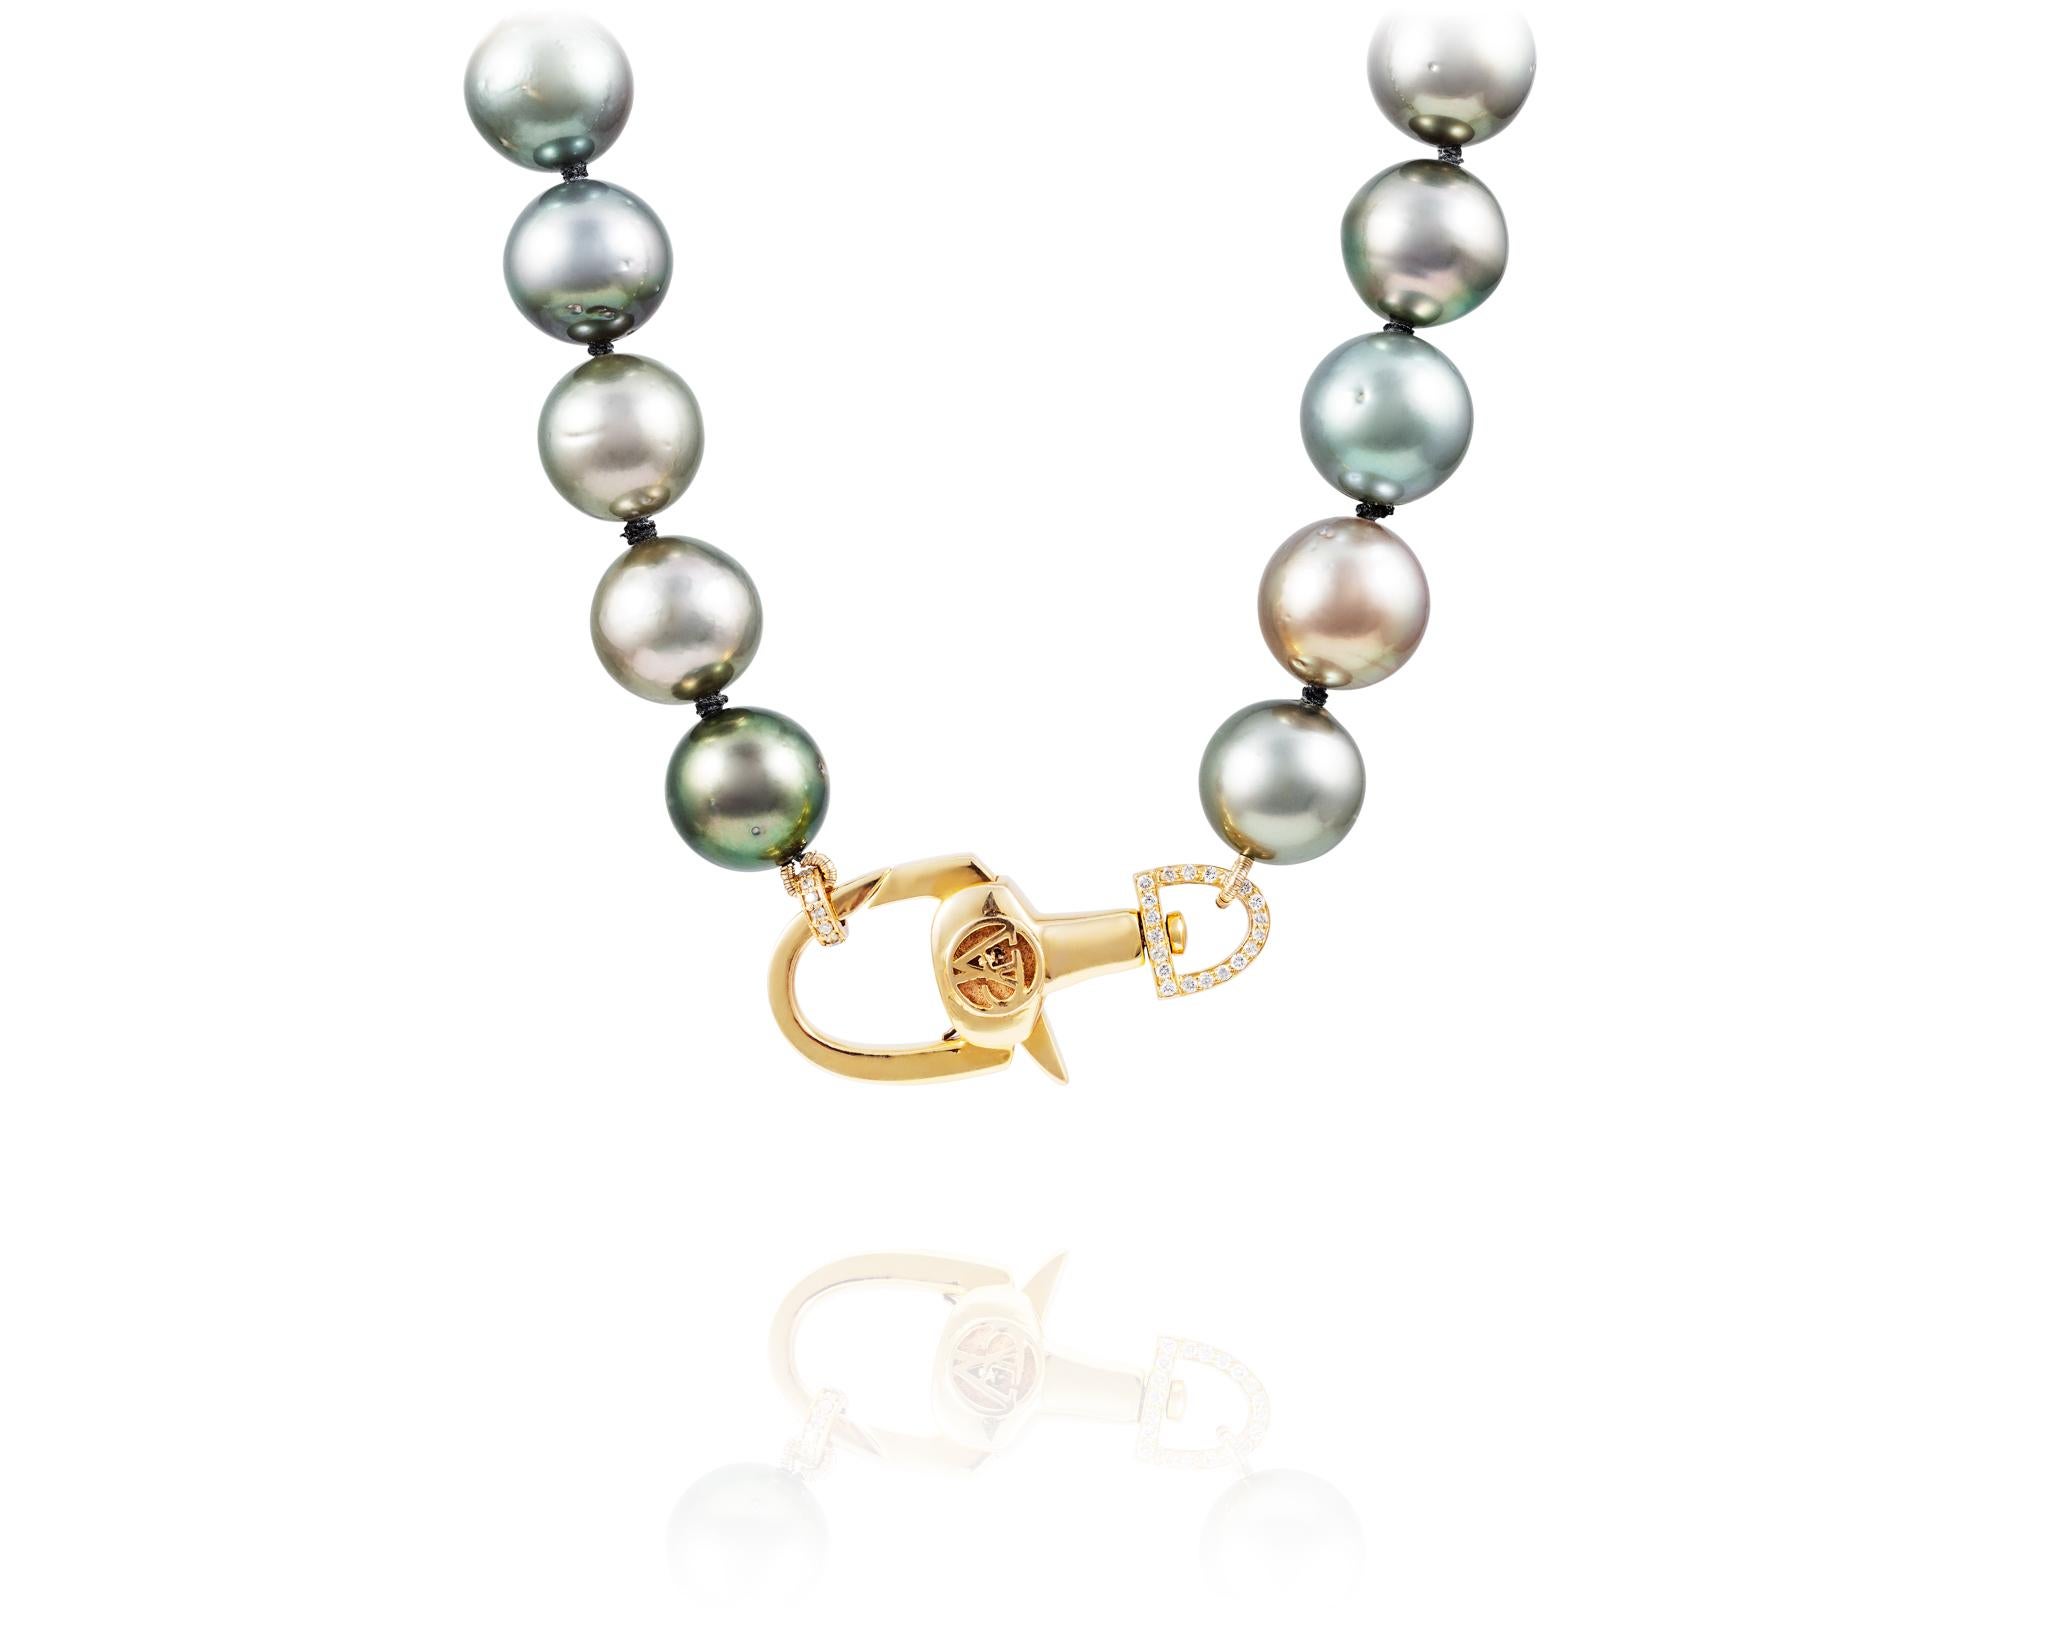 Part of the Vincent Peach Pearl Collection, the Equestrian Knotted Necklace features 18